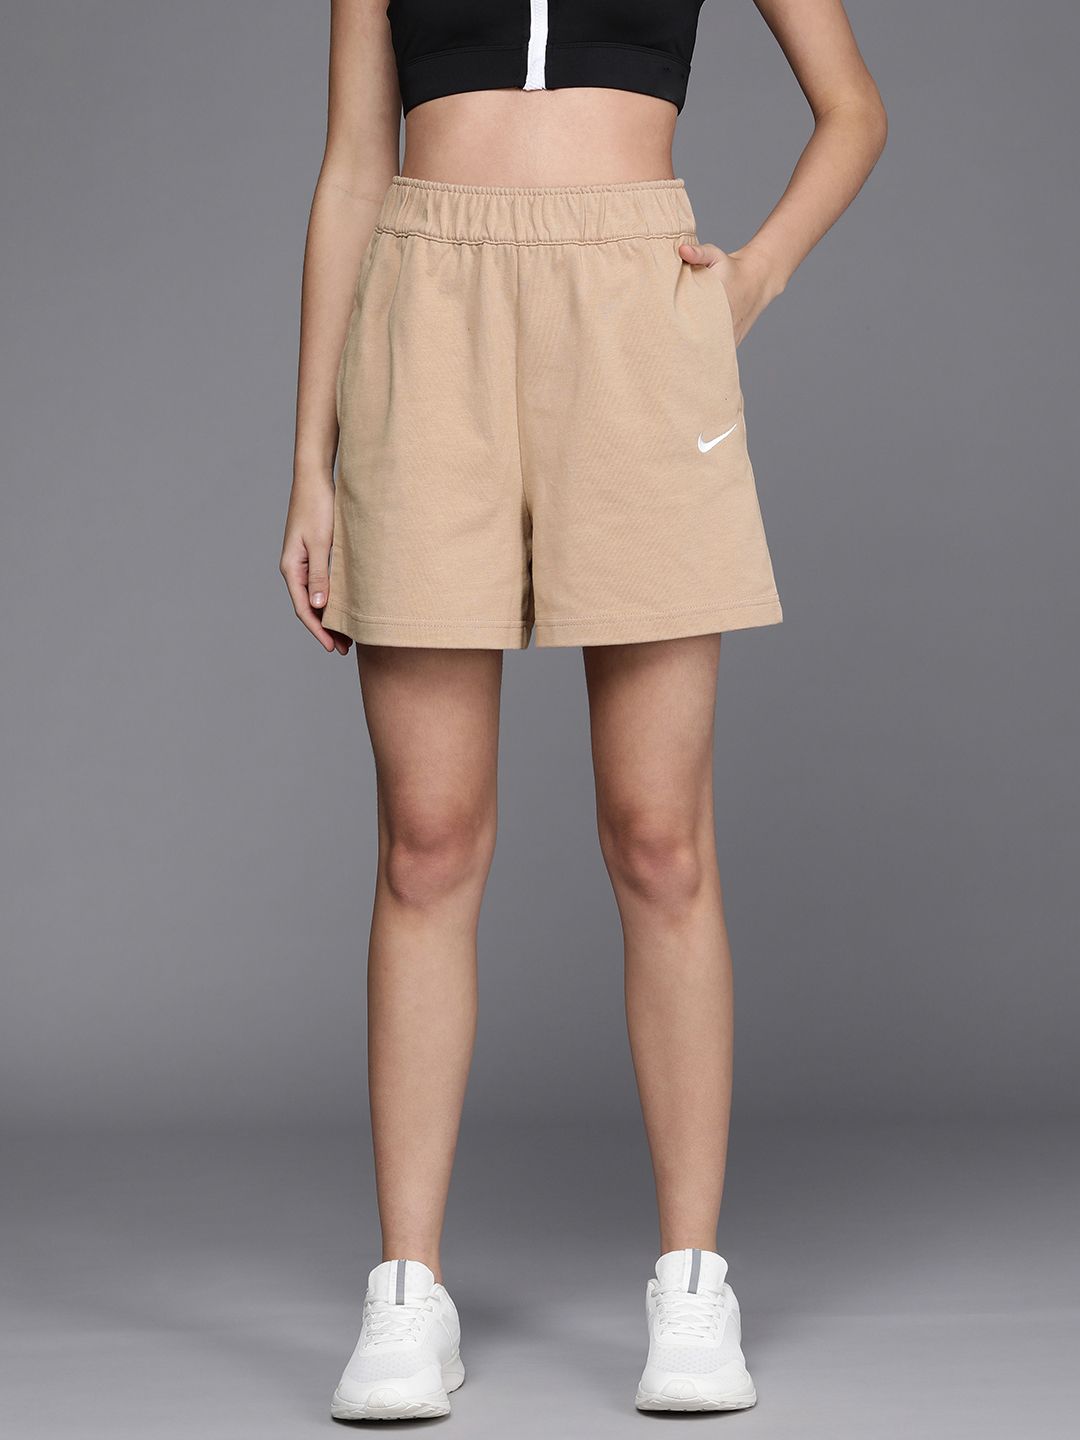 Nike Women Beige Pure Cotton Jersey Sports Shorts Price in India